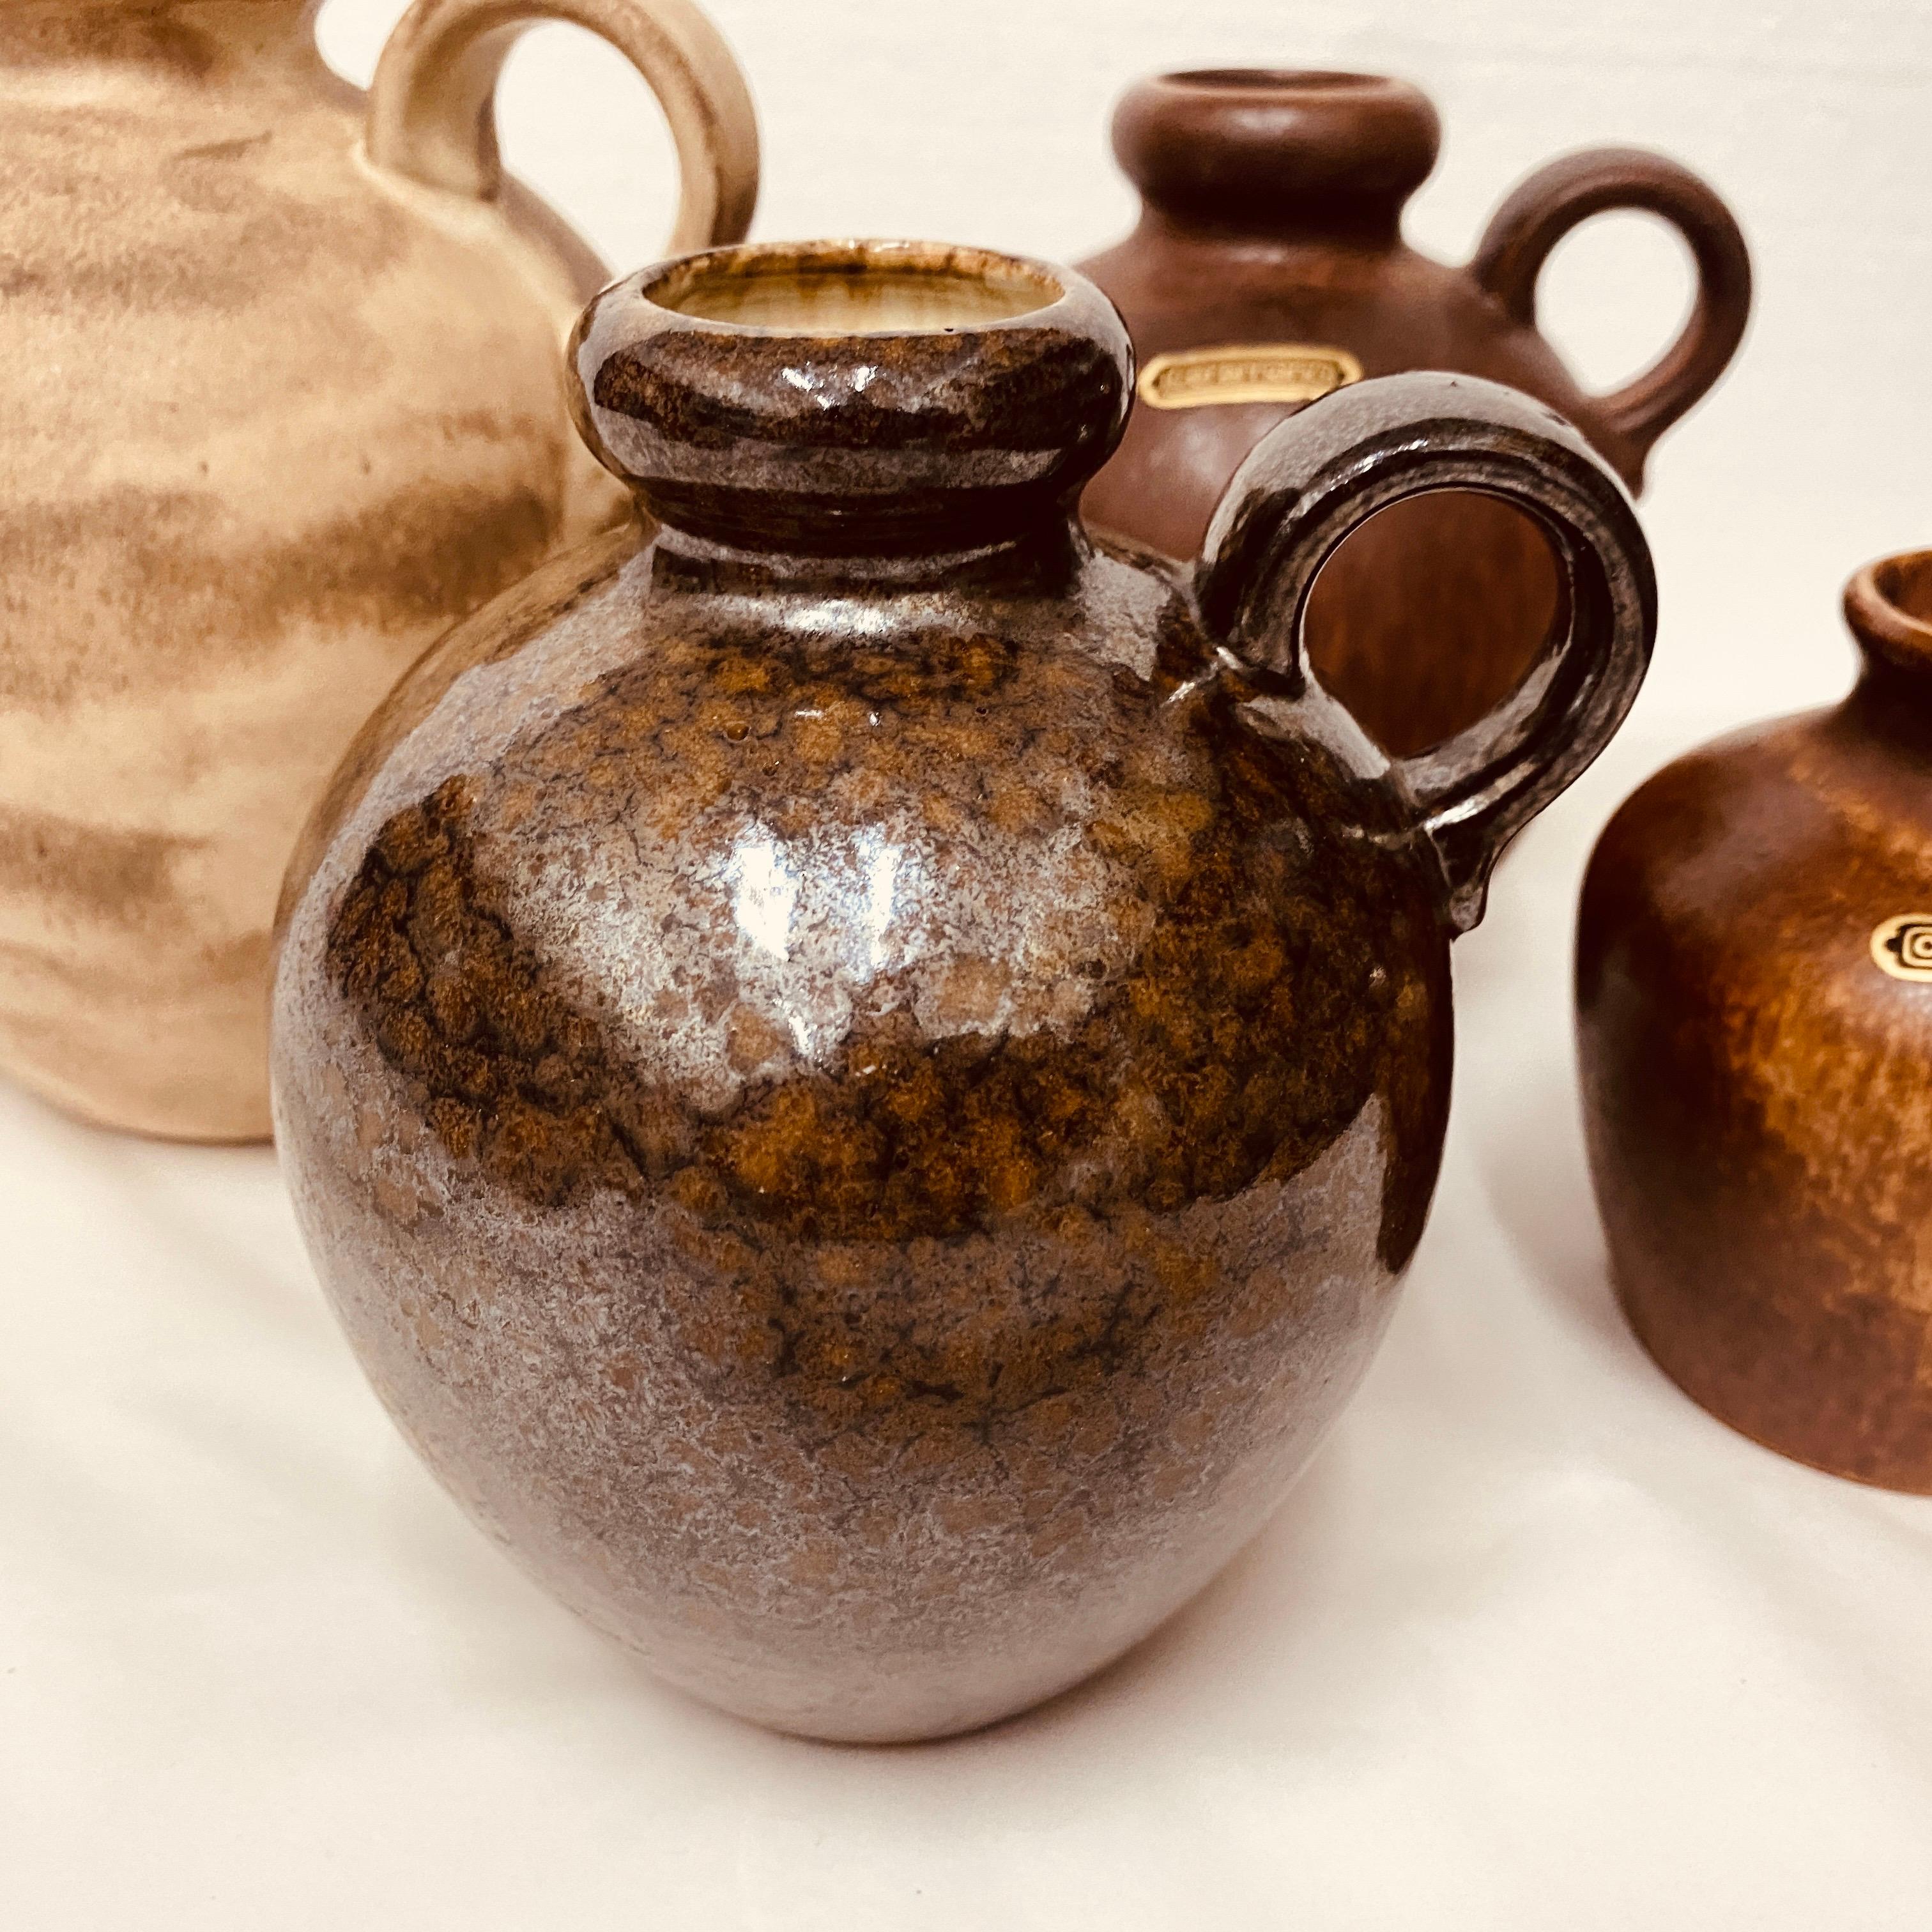 Four hand-crafted jugs made in Germany in the Seventies by Ceramano, they are in perfect conditions and labeled and signed on the bottom.